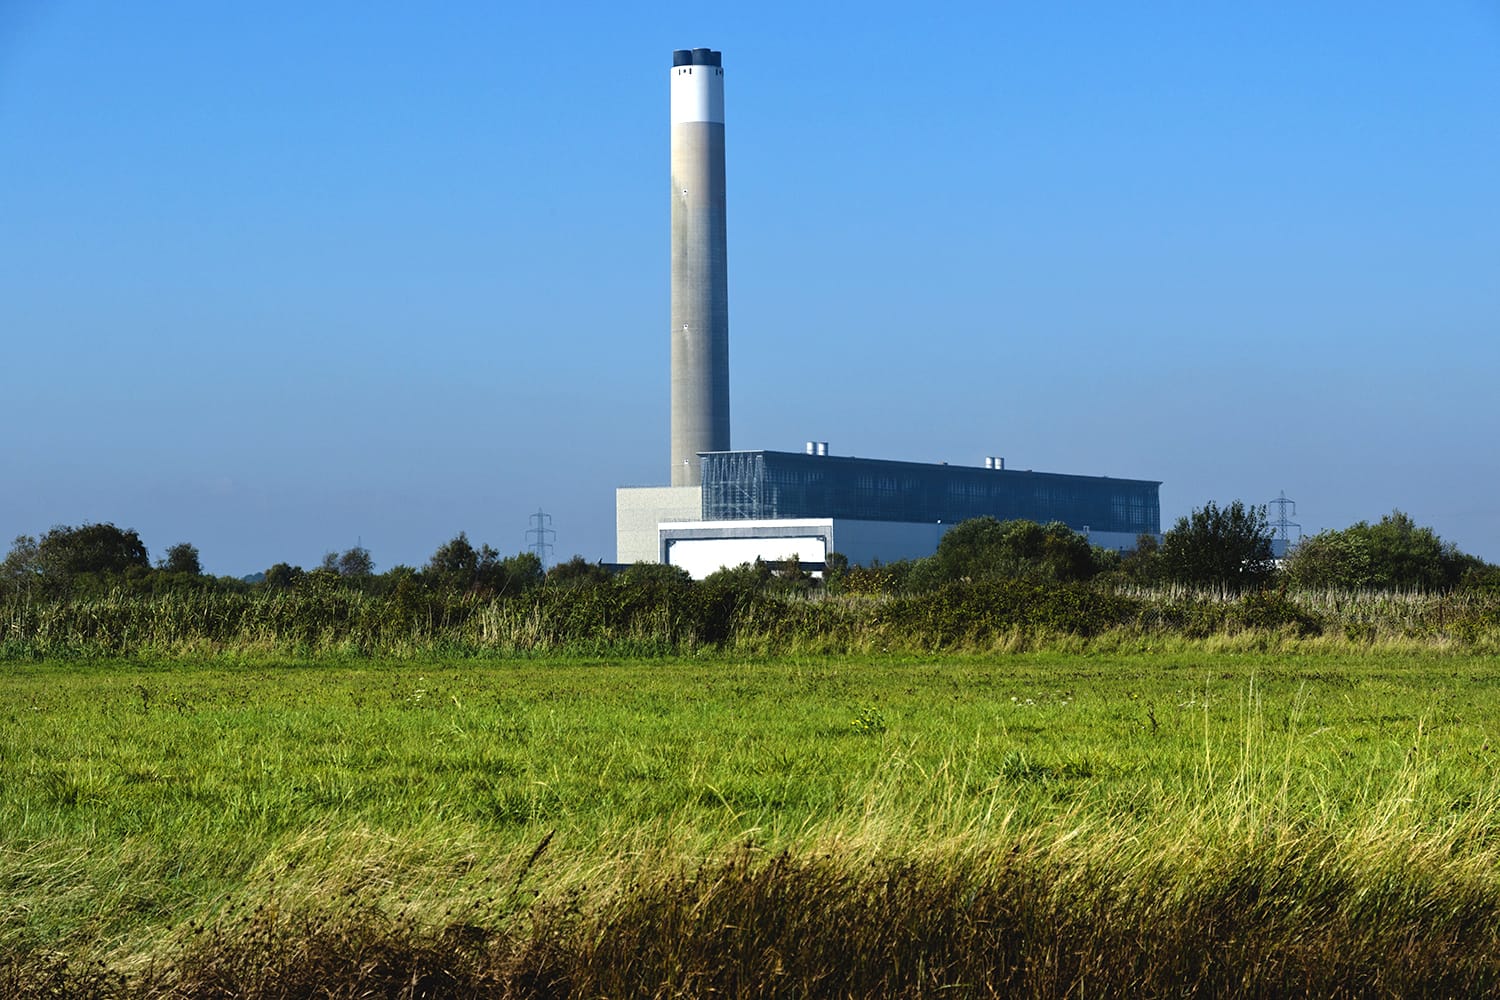 Fawley Power Station in the UK